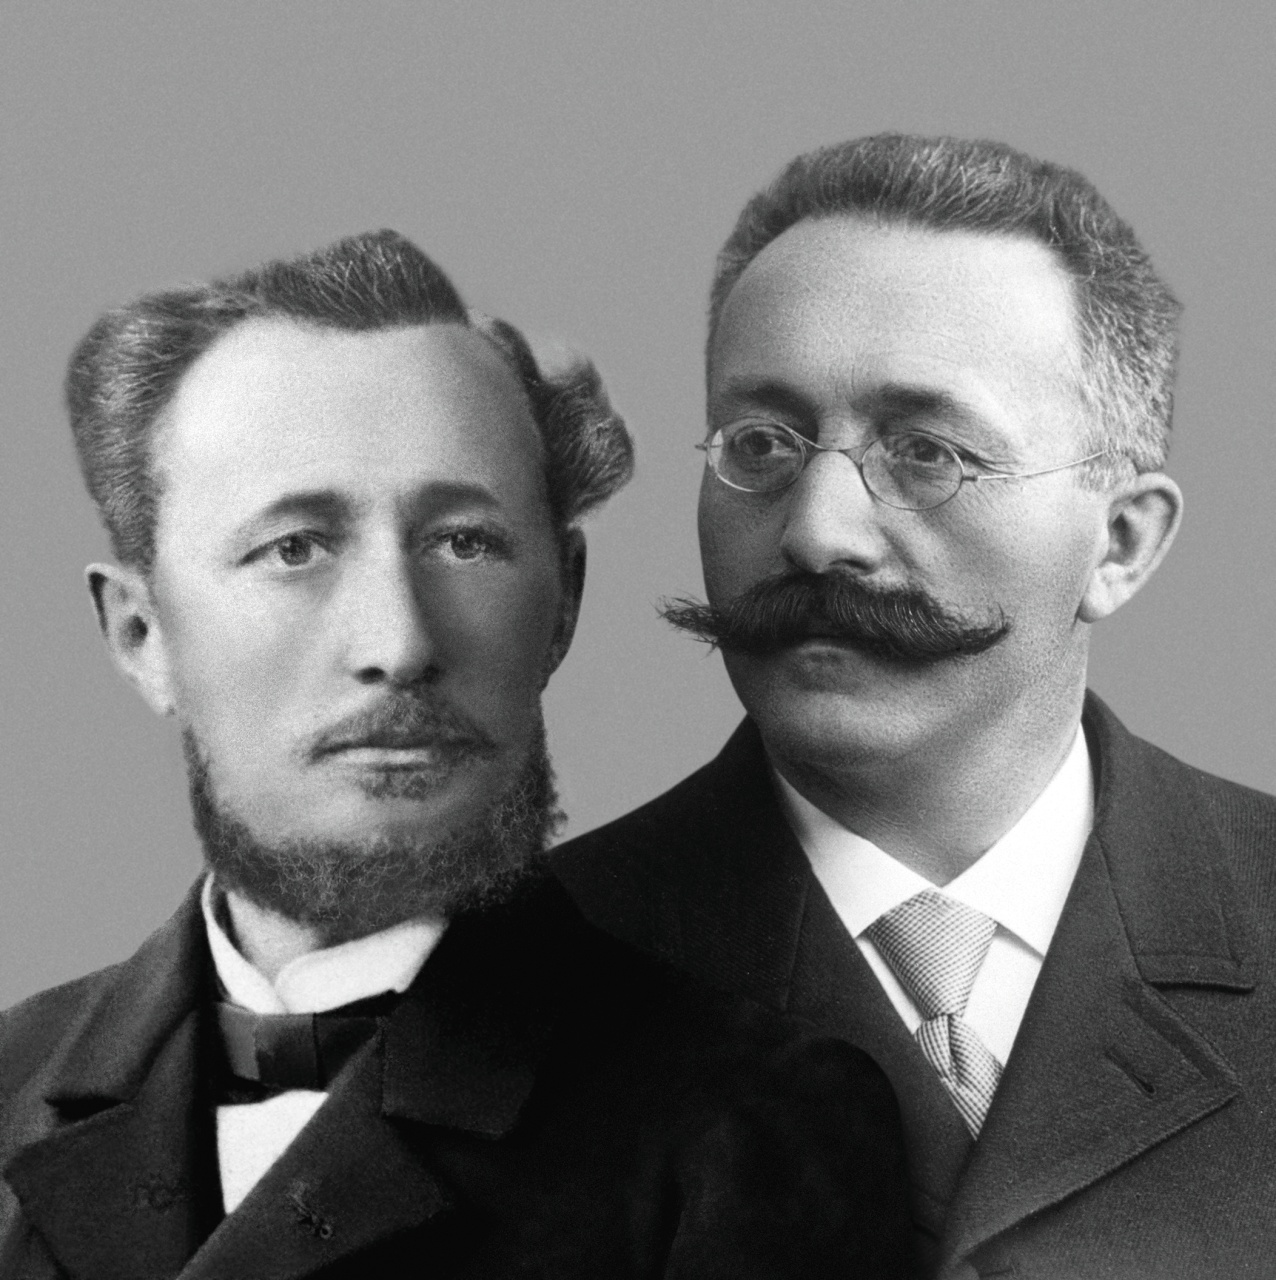 Co-founders Jules Louis Audemars and Edward Auguste Piguet were both watchmakers by trade.